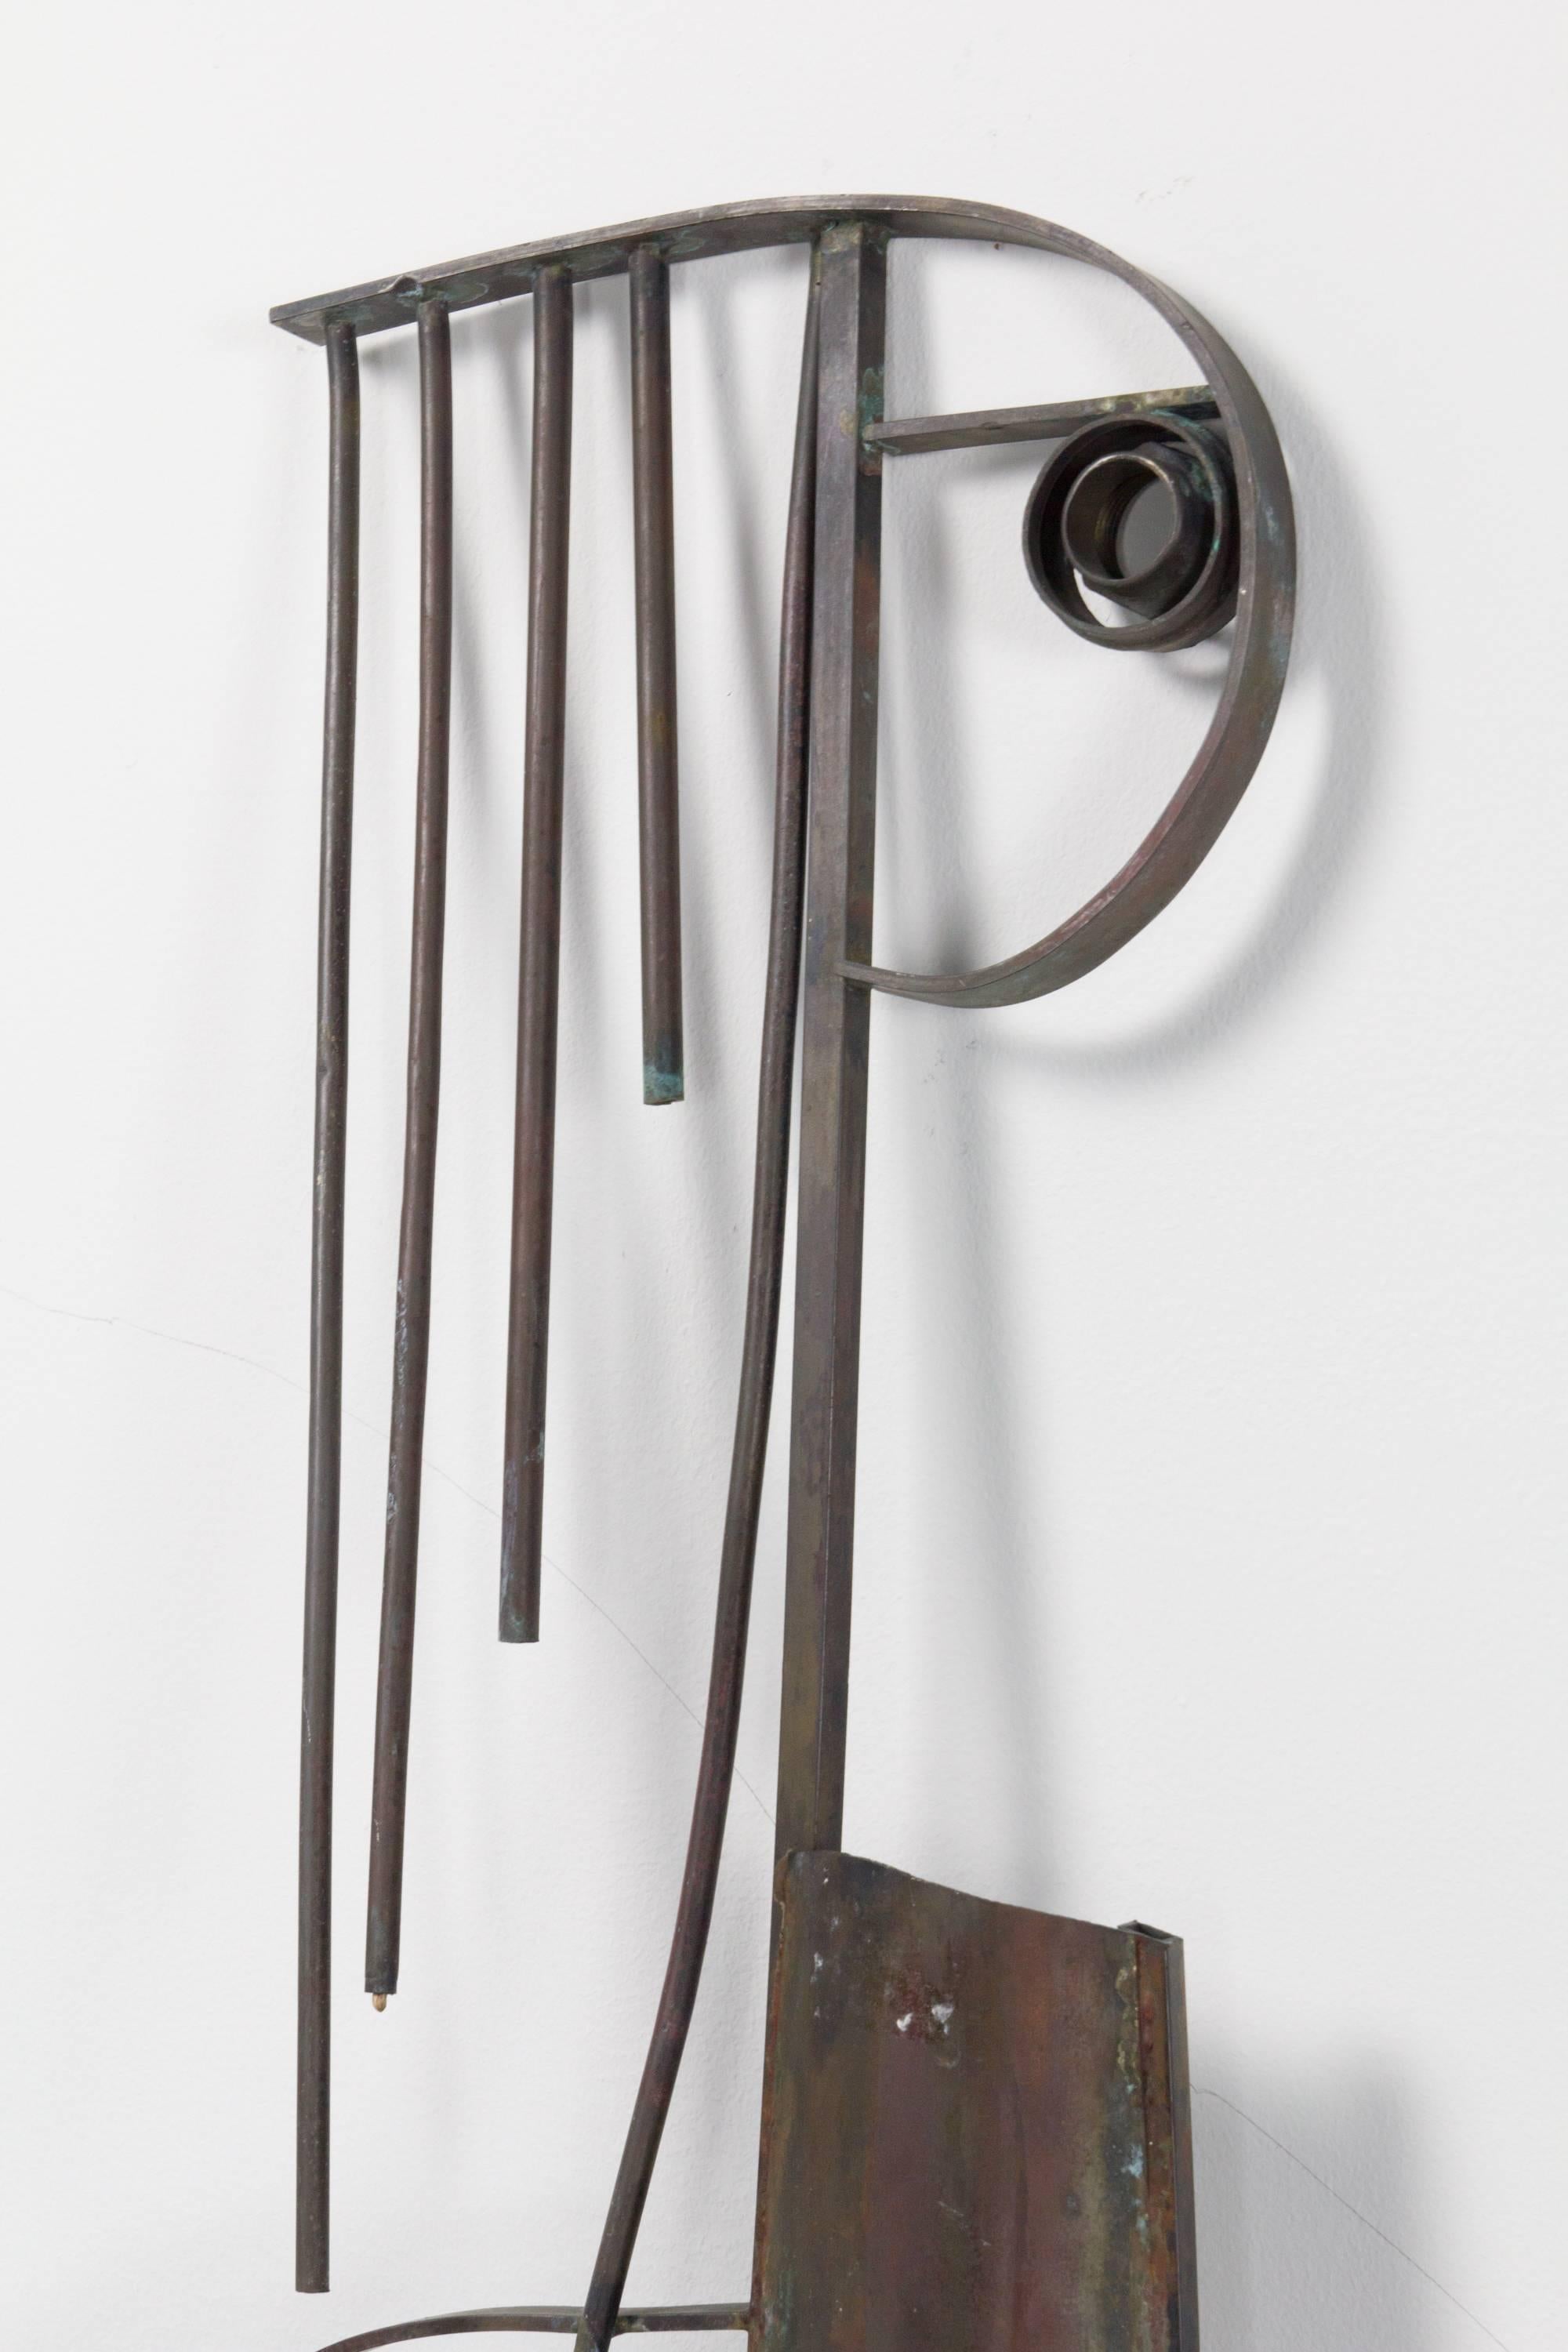 Leaning or mounted sculpture of a woman by Peter Janssen comprised of sheet metal elements and found hardware detail.